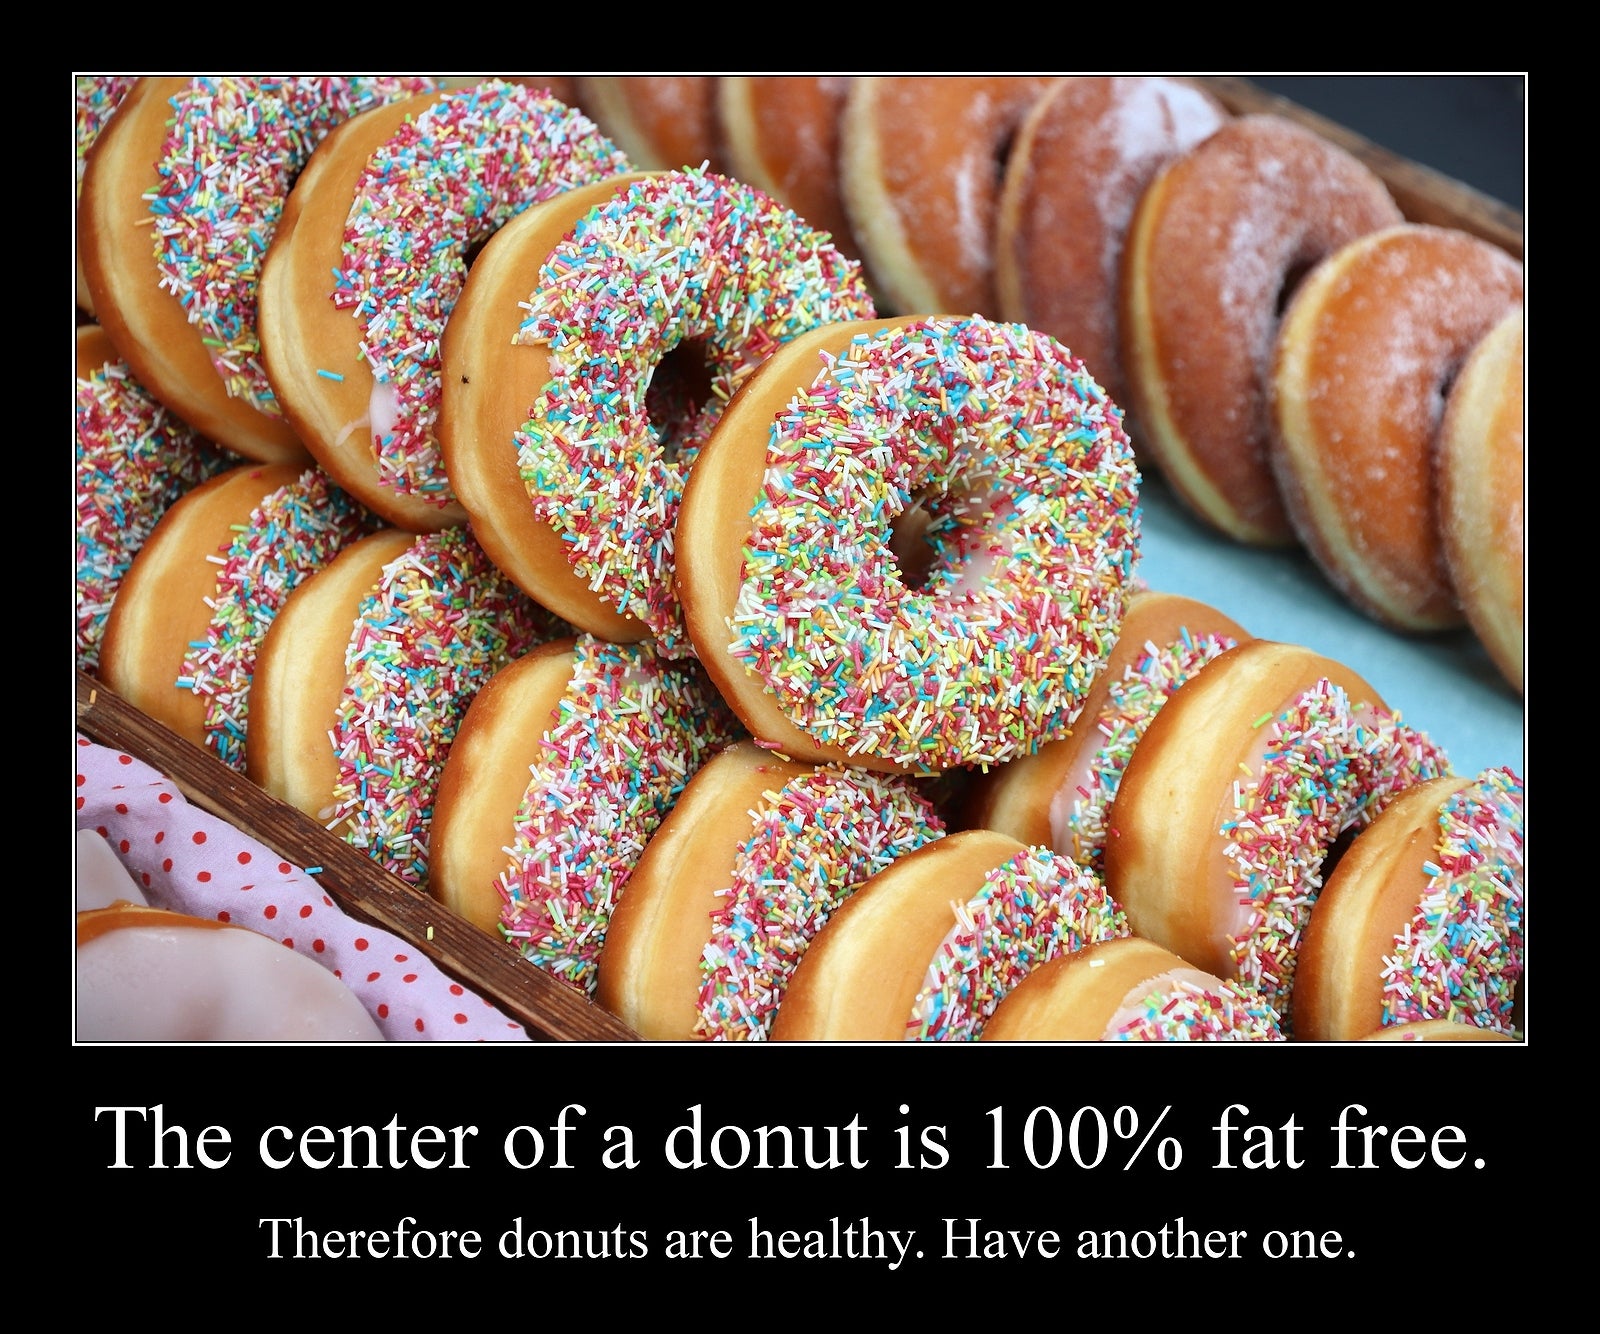 Funny meme for social media sharing. Healthy food and donuts meme.